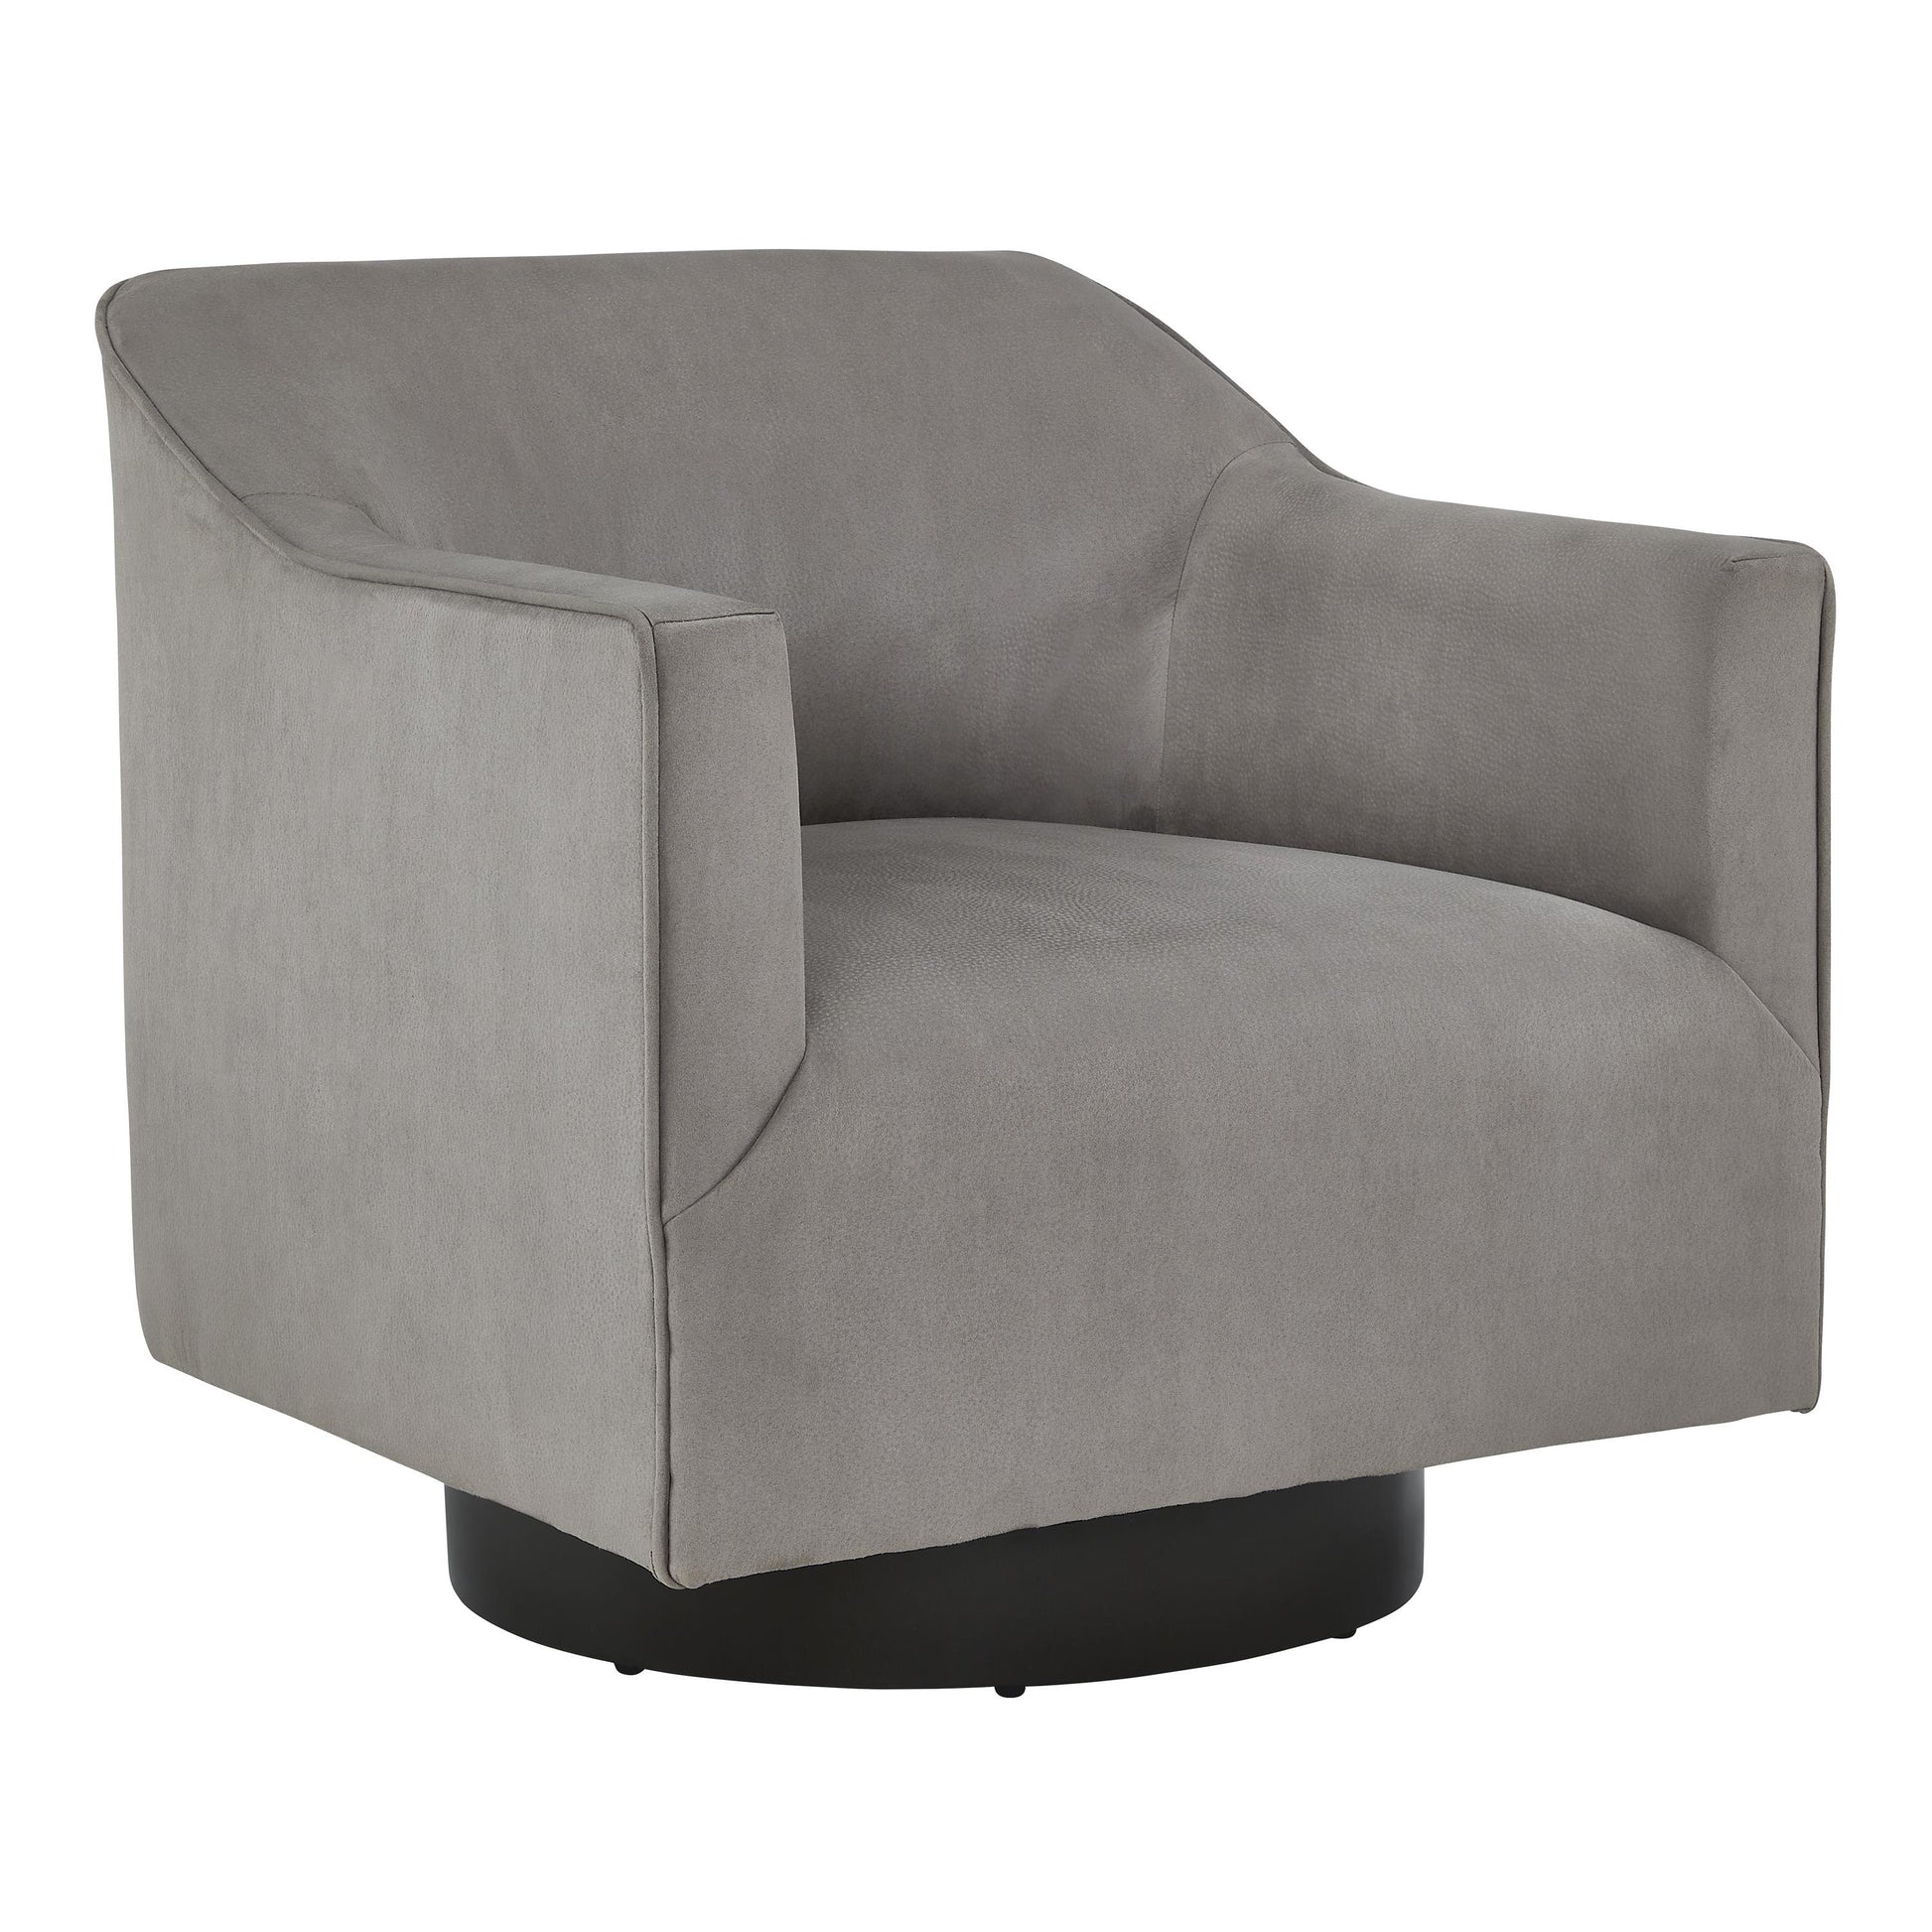 Signature Design by Ashley Phantasm Swivel Leather Look Accent Chair A3000343 IMAGE 1